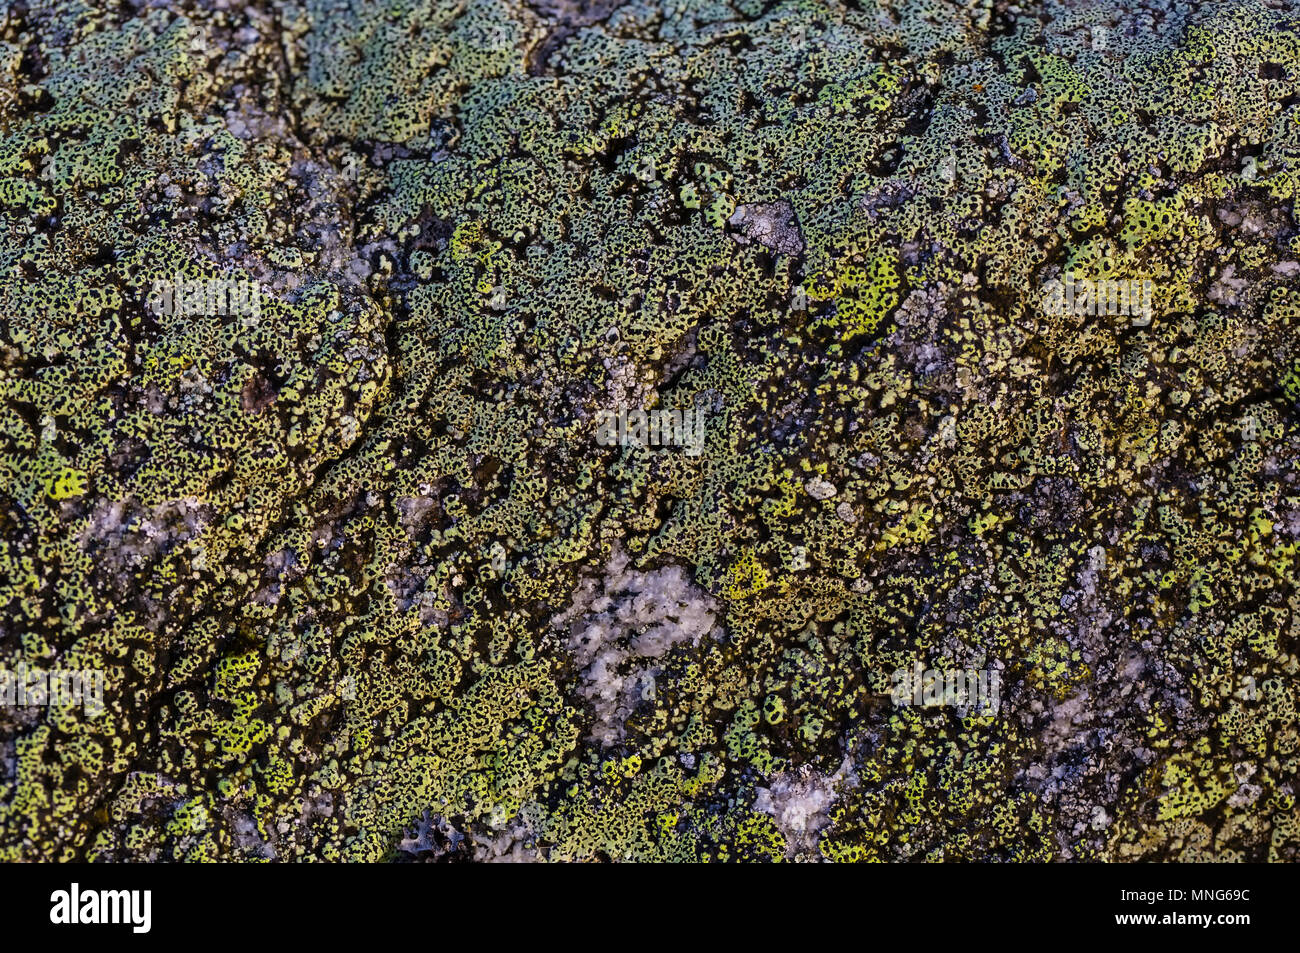 Sometimes you have to stop and narrow your vision from the big picture all around you to a minute patch of lichen growing on granite Stock Photo